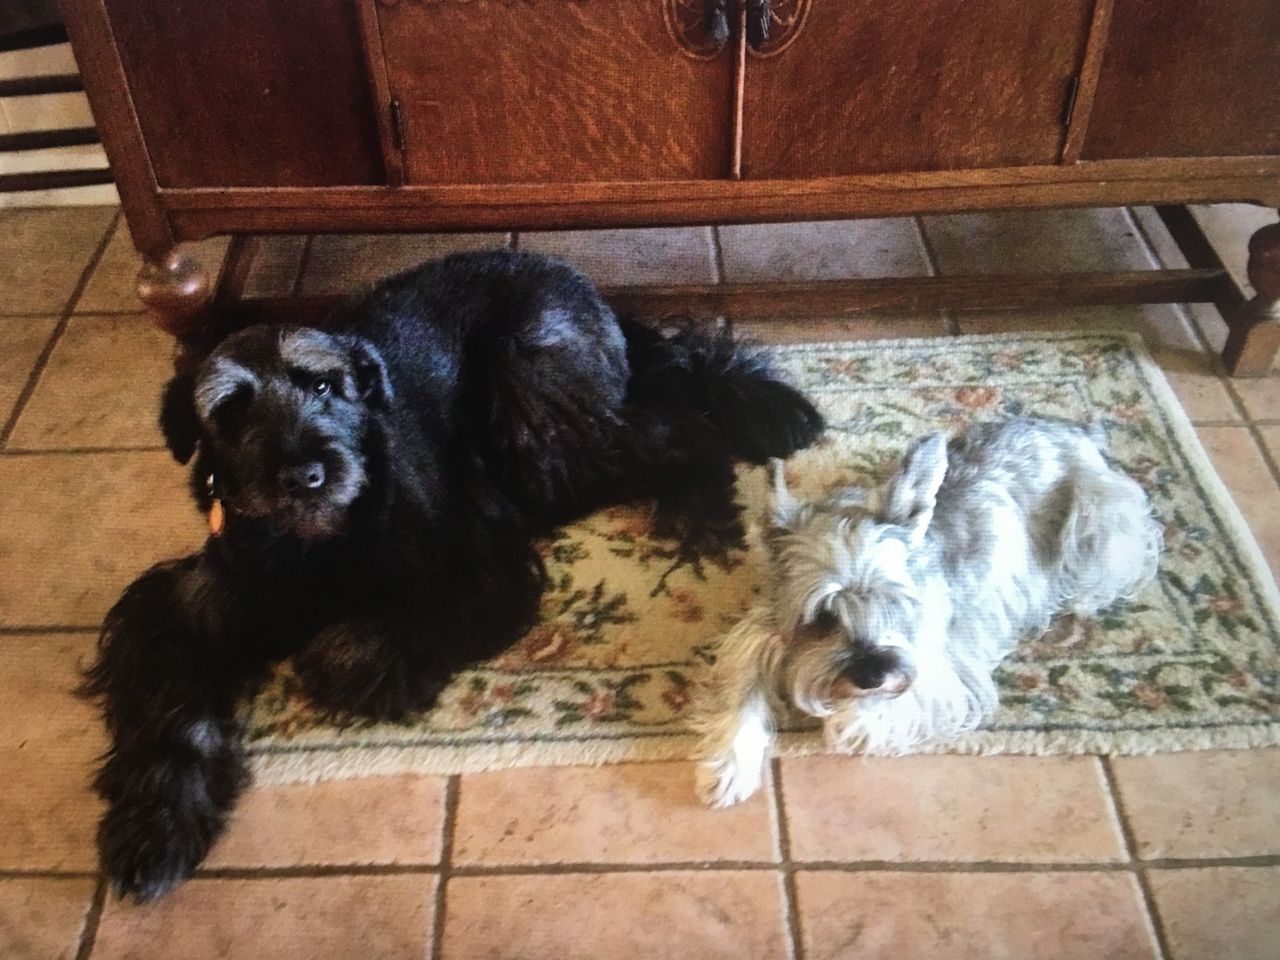 Spectrum News viewer Margaret Ricke shared this pic of her furry babies Emma and Angel. The miniature Schnauzer Angel is quite devious but loves her Giant Schnauzer sister Emma. 